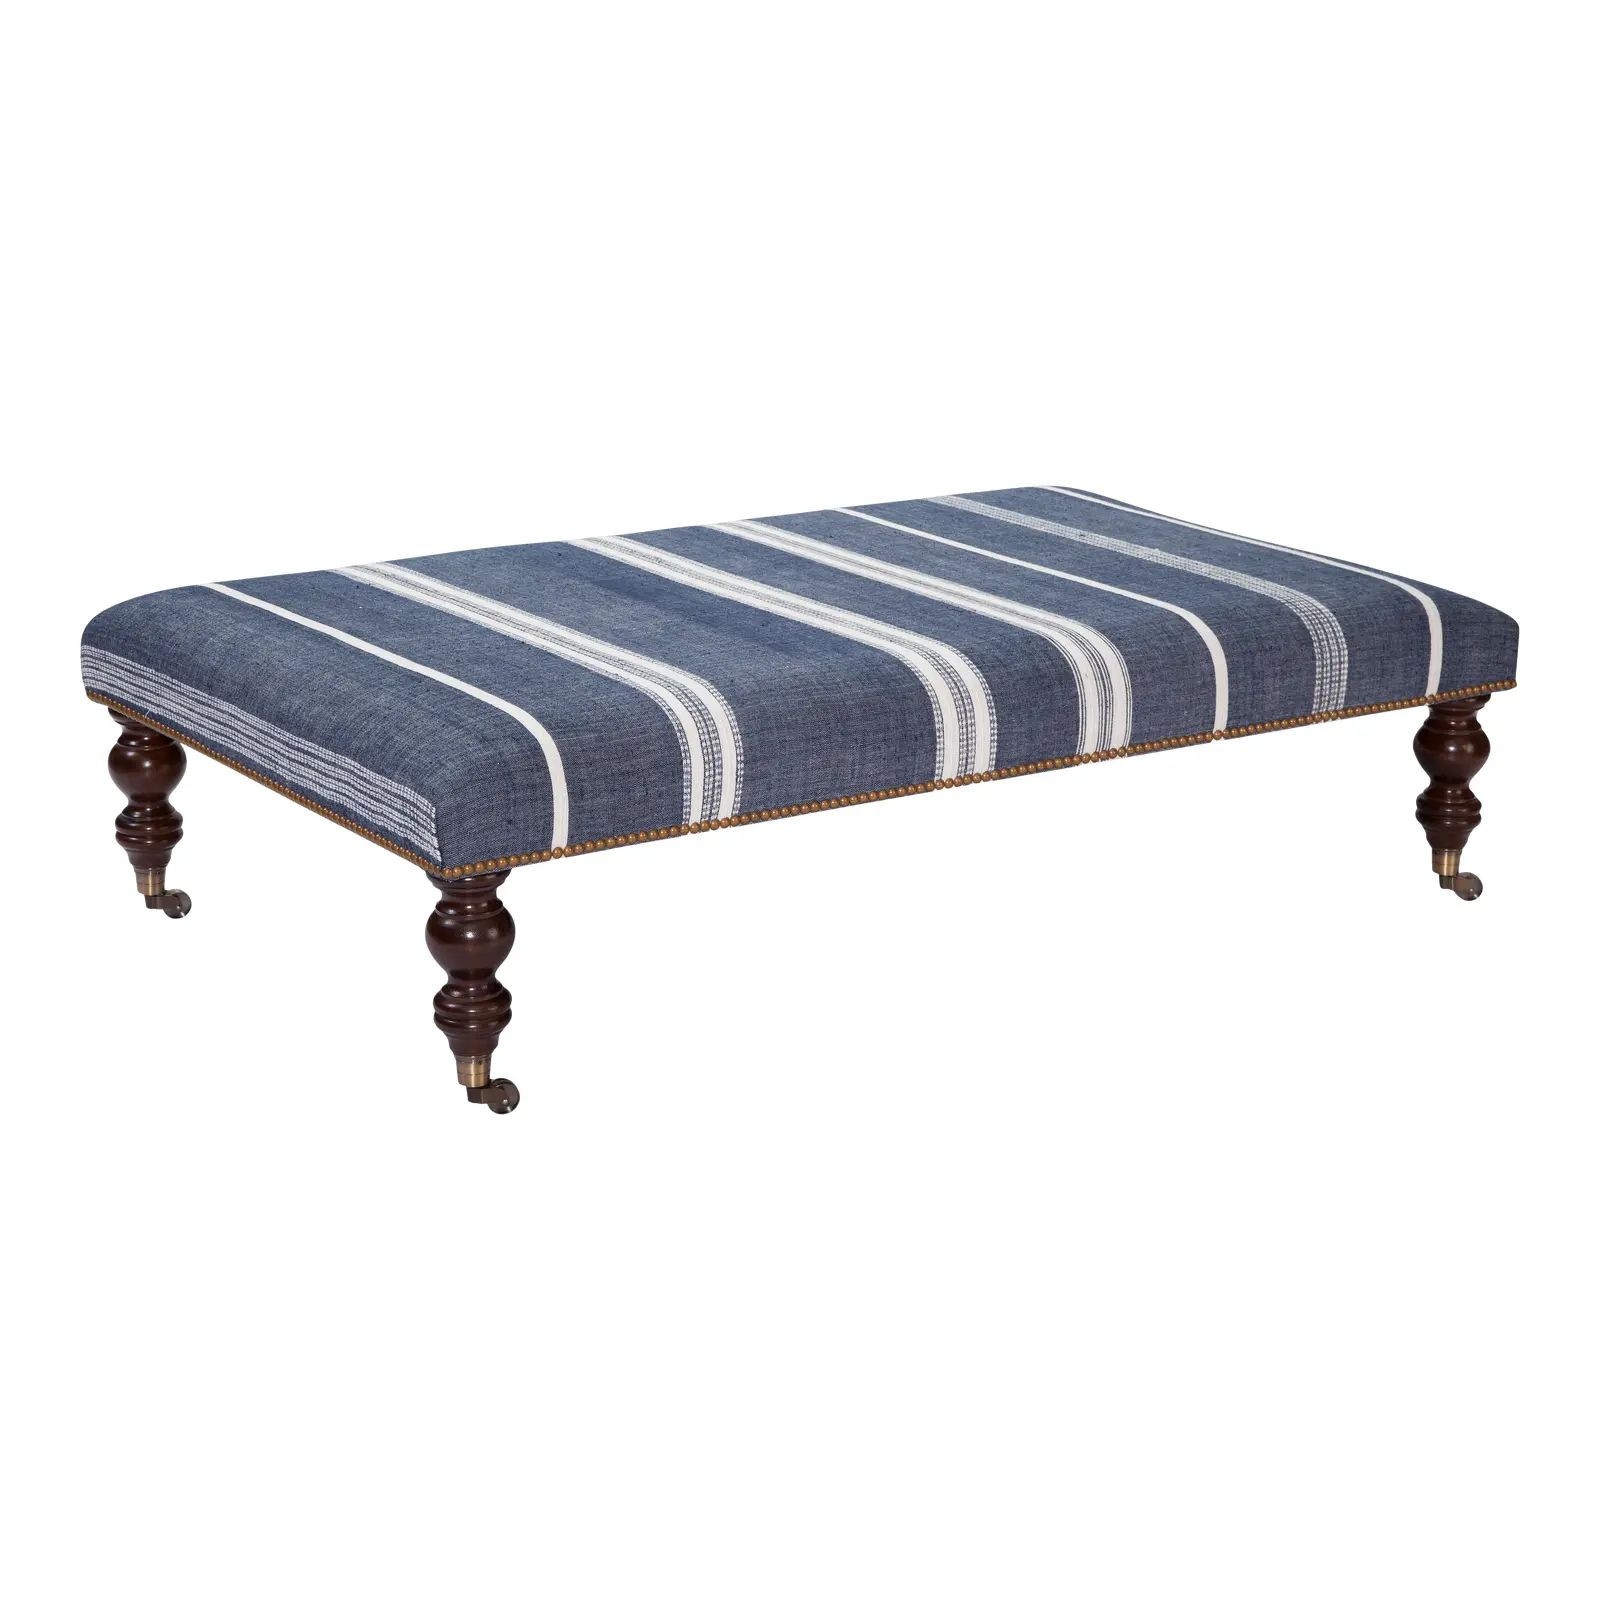 Buzios Ottoman in Aiden Navy with Natural | Chairish